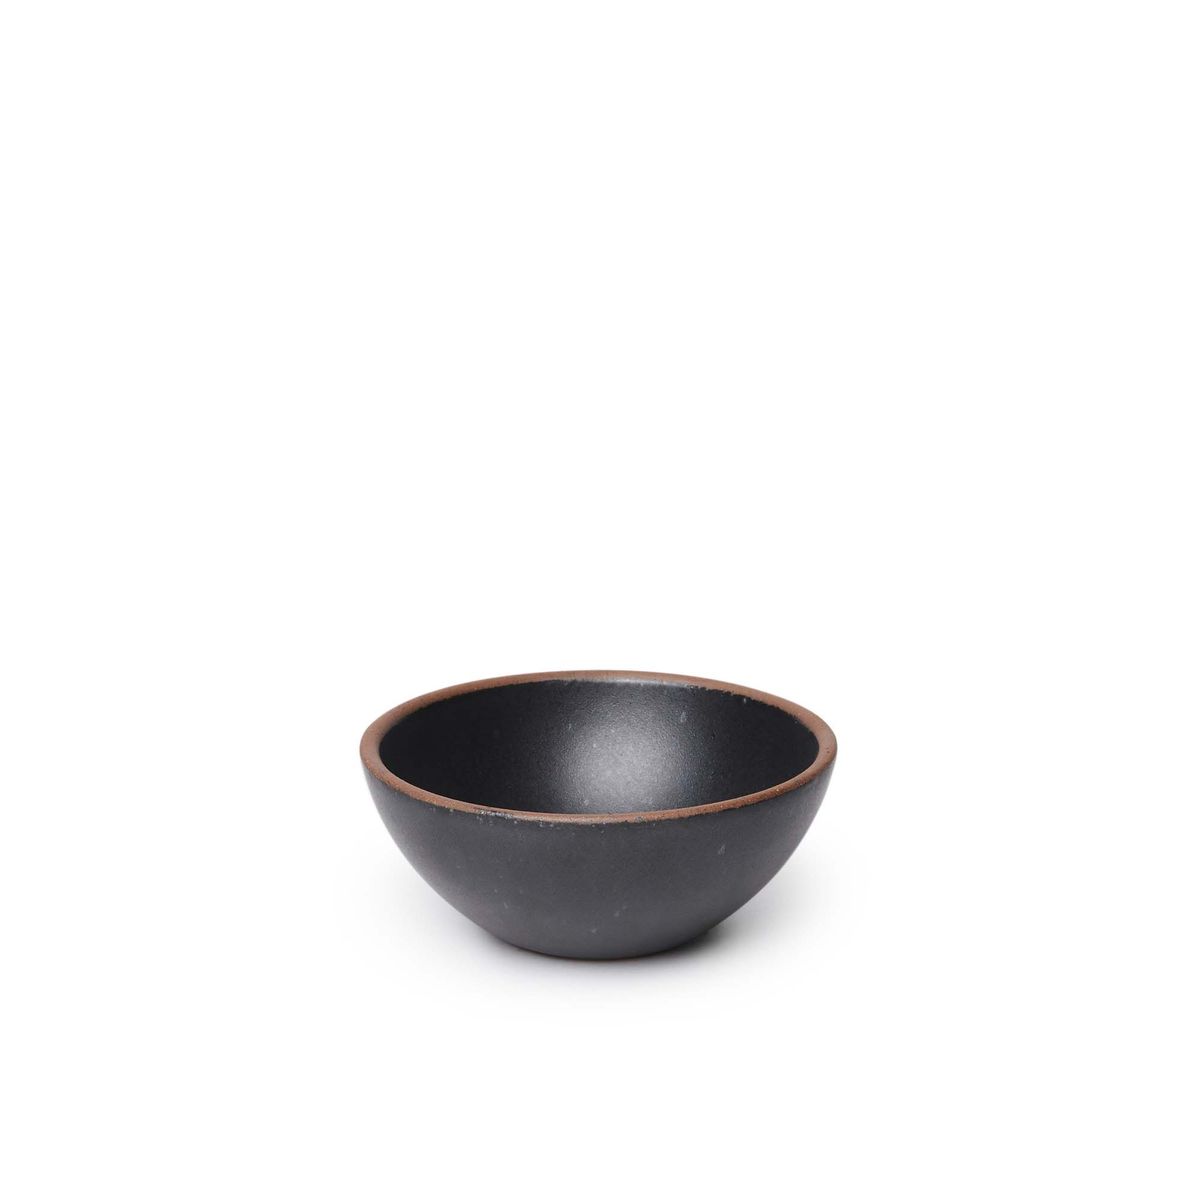 A small dessert sized rounded ceramic bowl in a graphite black color featuring iron speckles and an unglazed rim